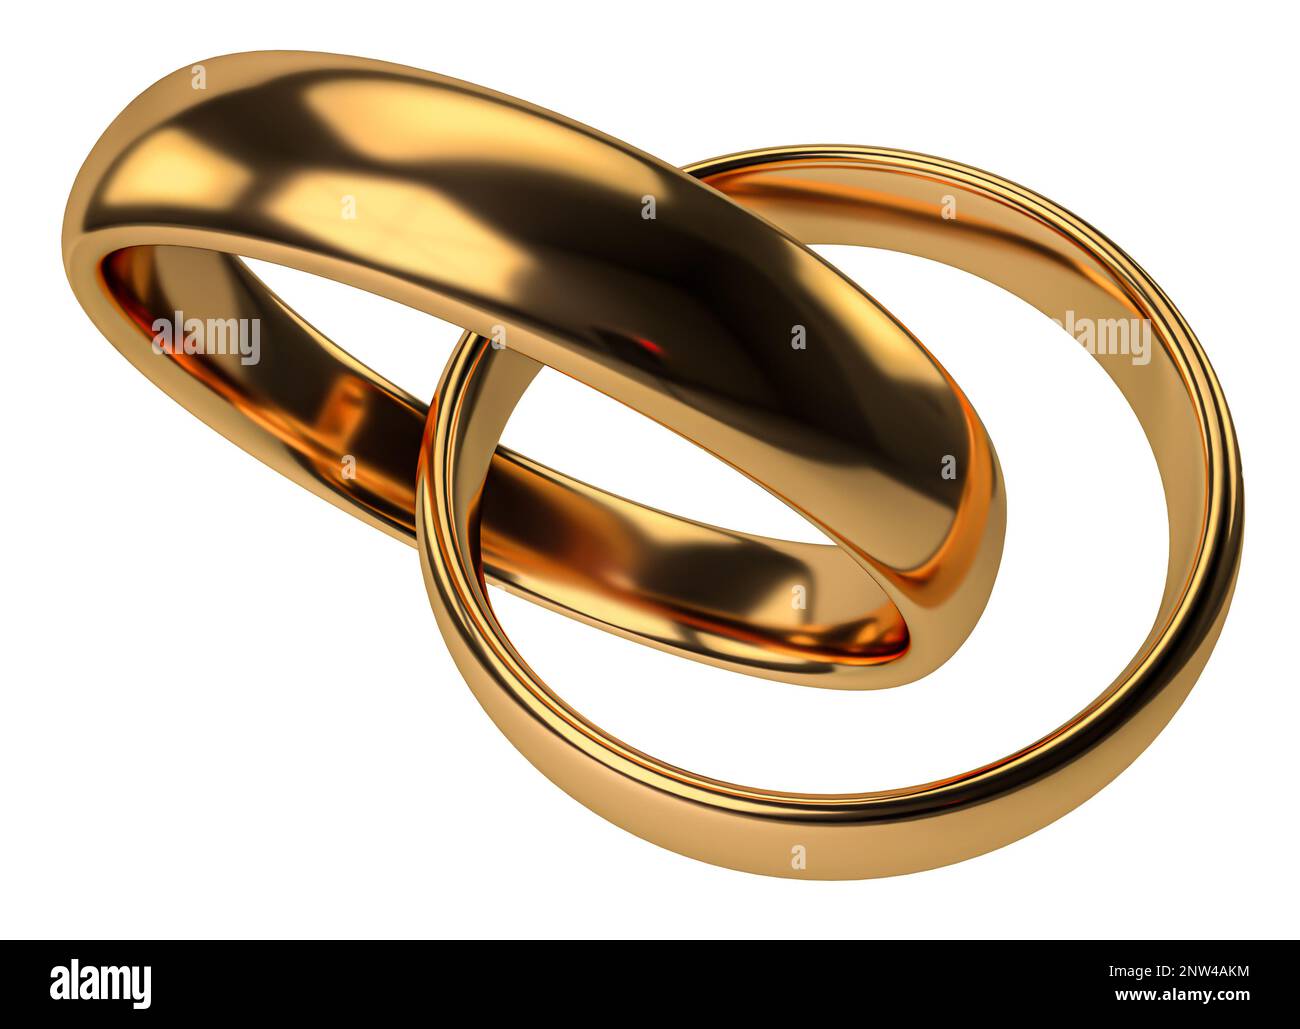 Illustration of two wedding gold rings isolated on white. Unity concepts Stock Photo